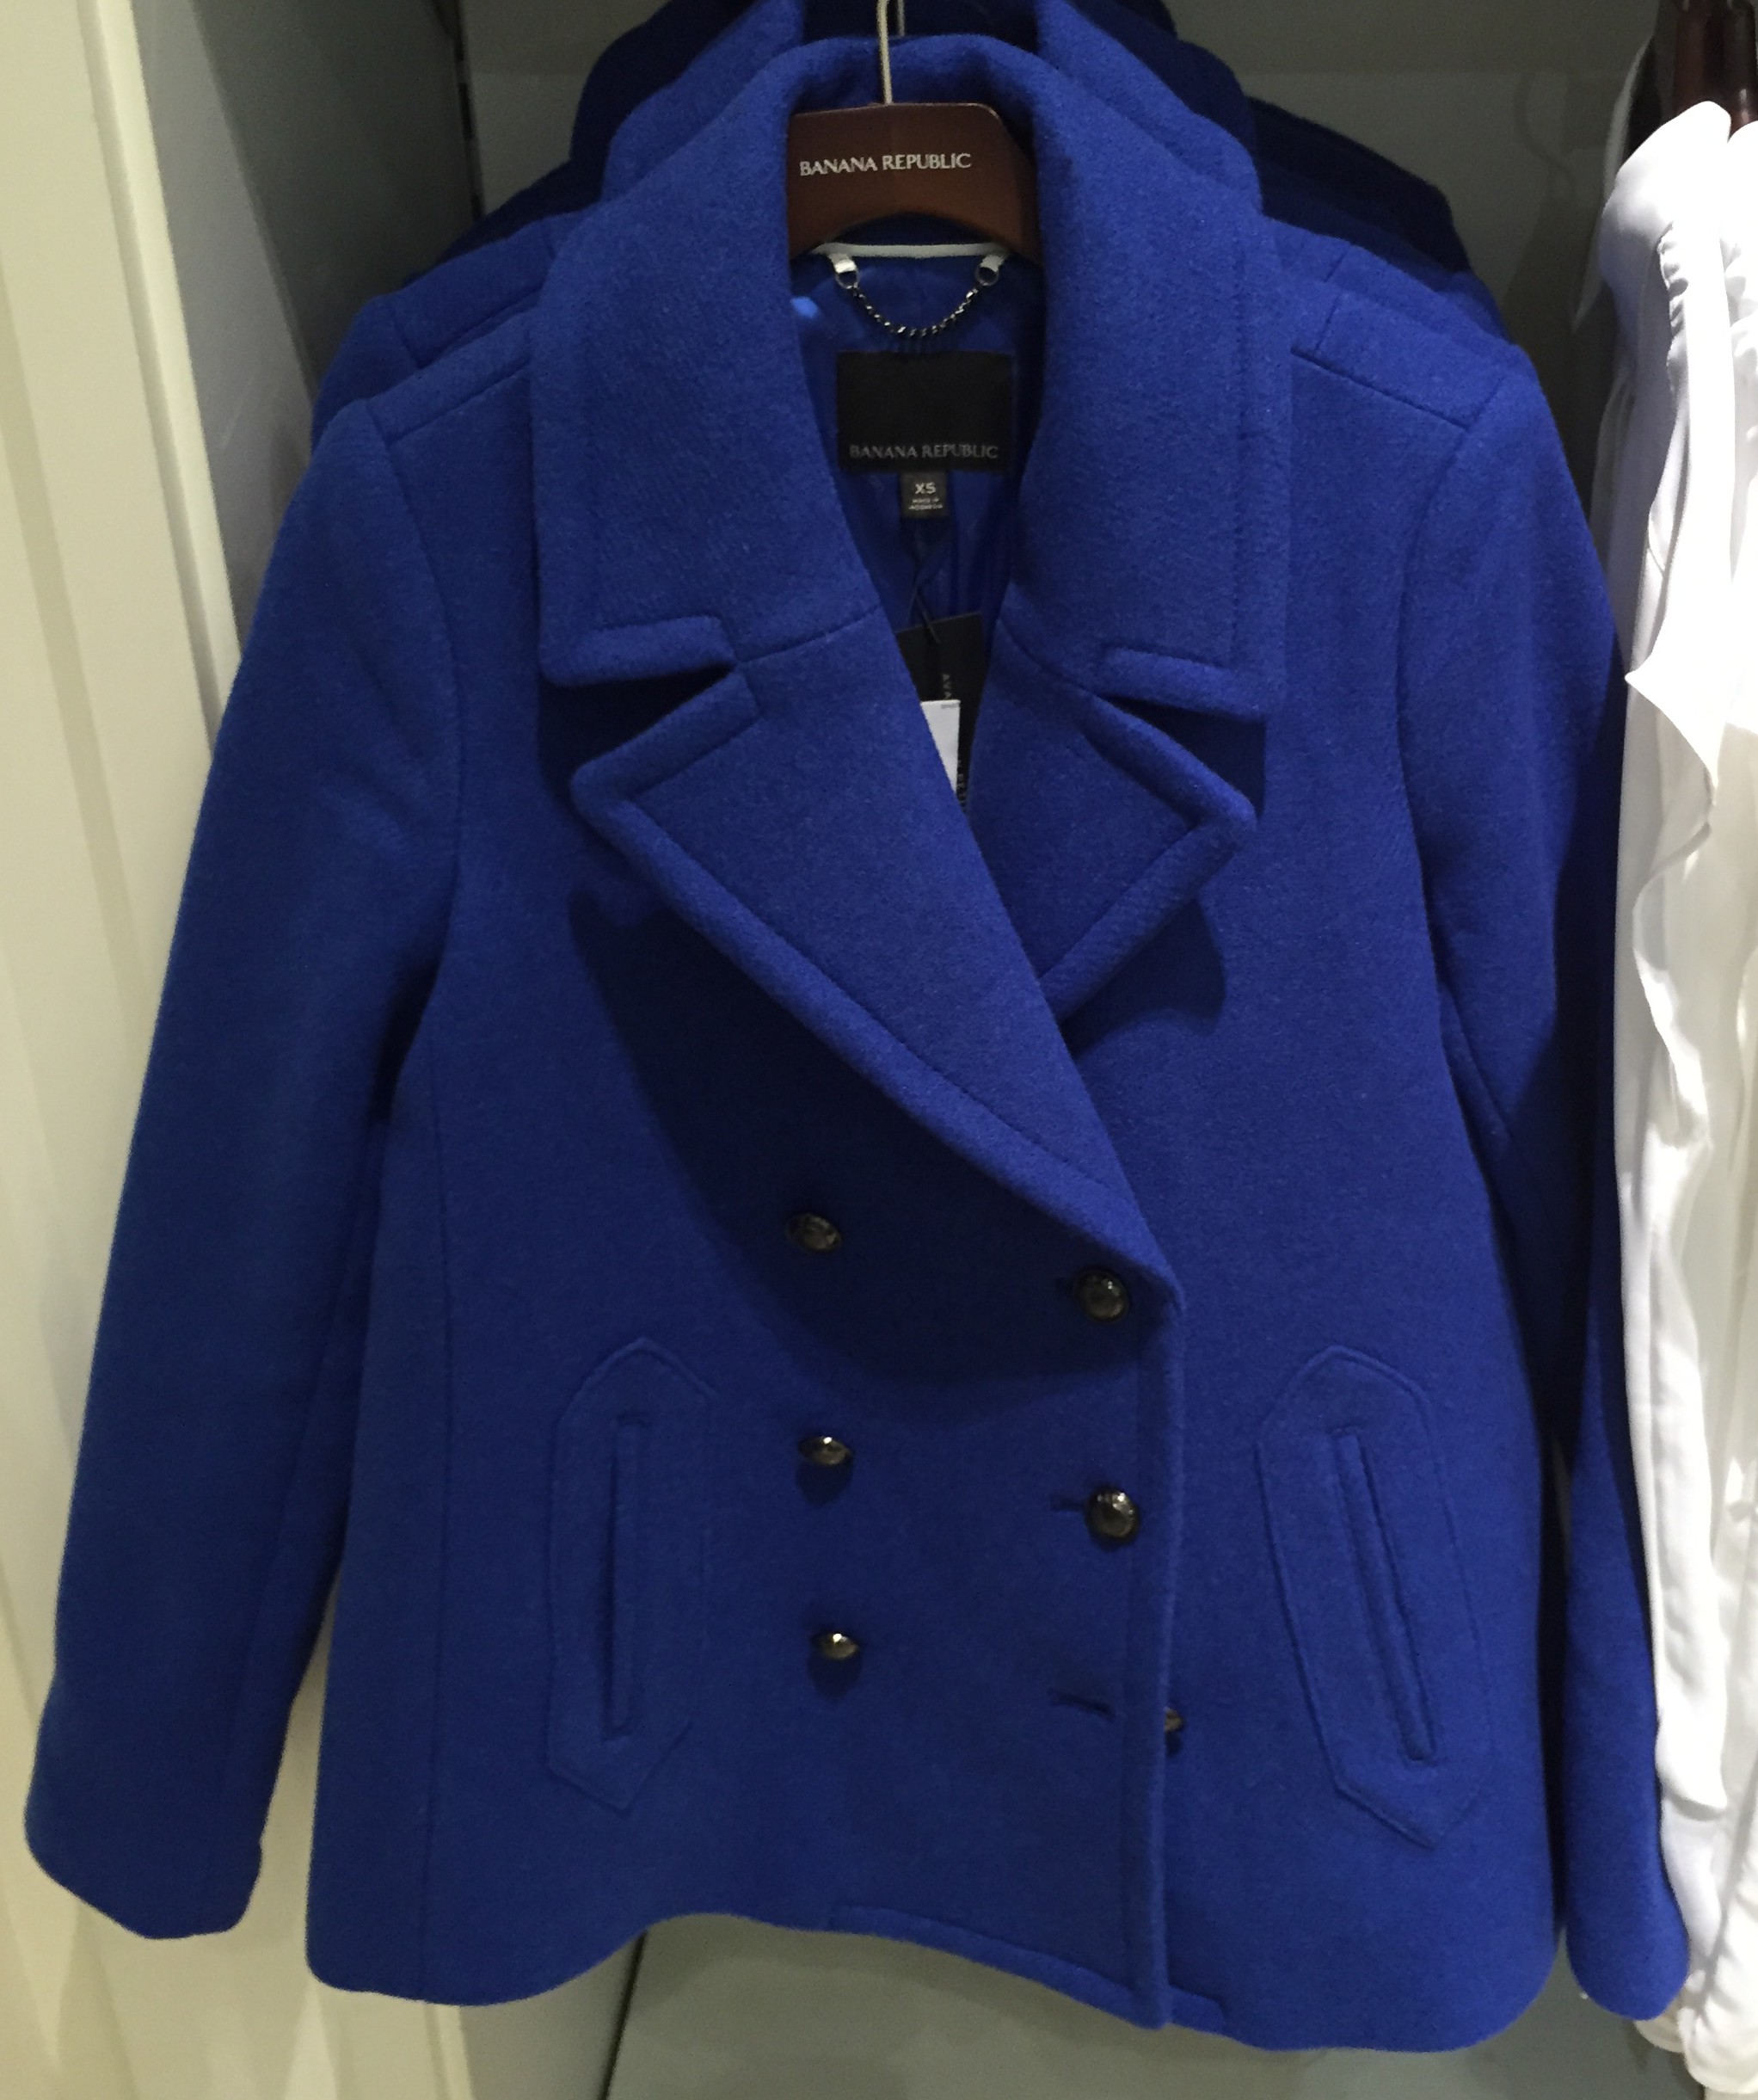 Online personal stylist - Westfield London - cocomamastyle - coats